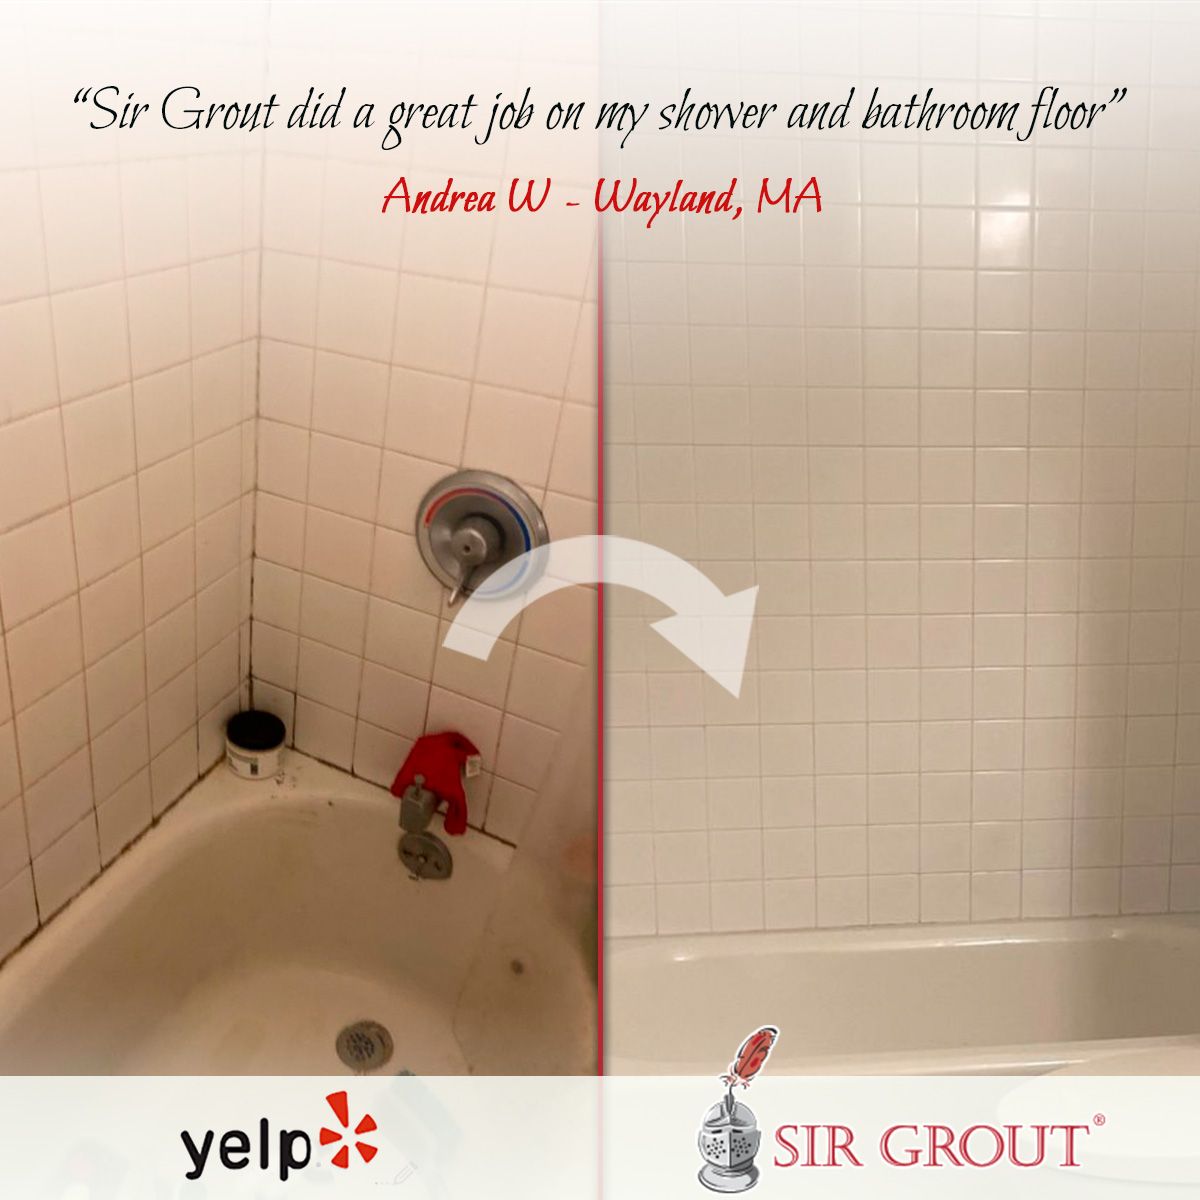 Sir Grout did a great job on my shower and bathroom floor